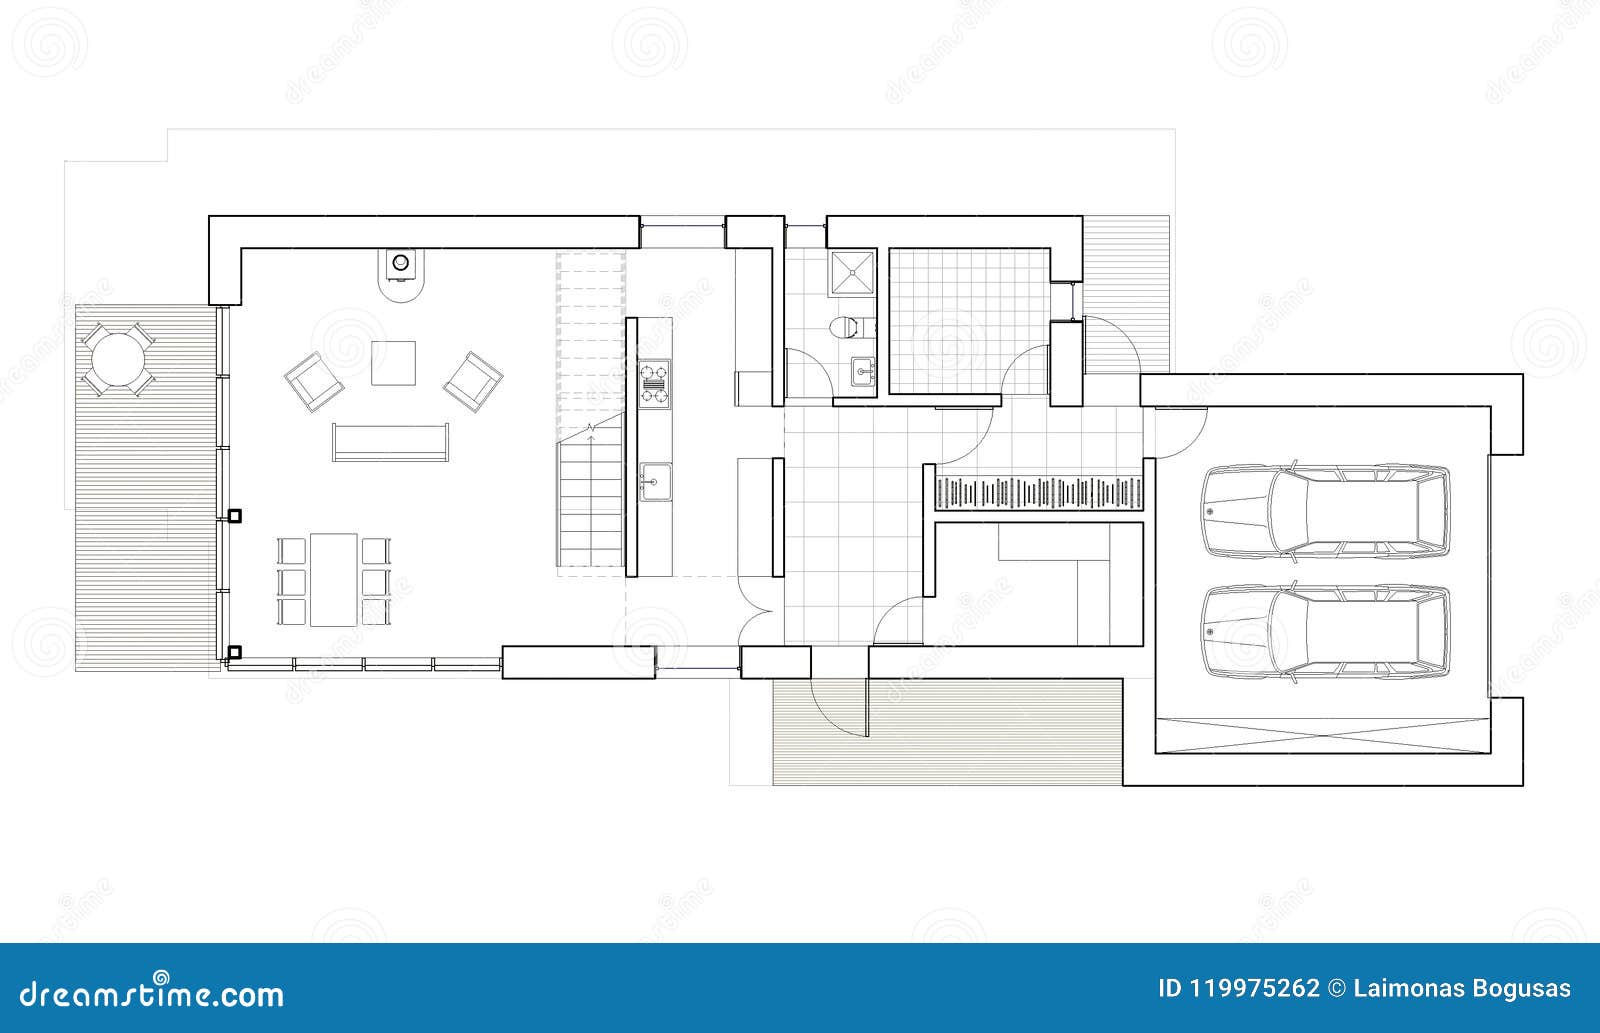 Drawing Floor Plan Of The Single Family House With Garage Stock